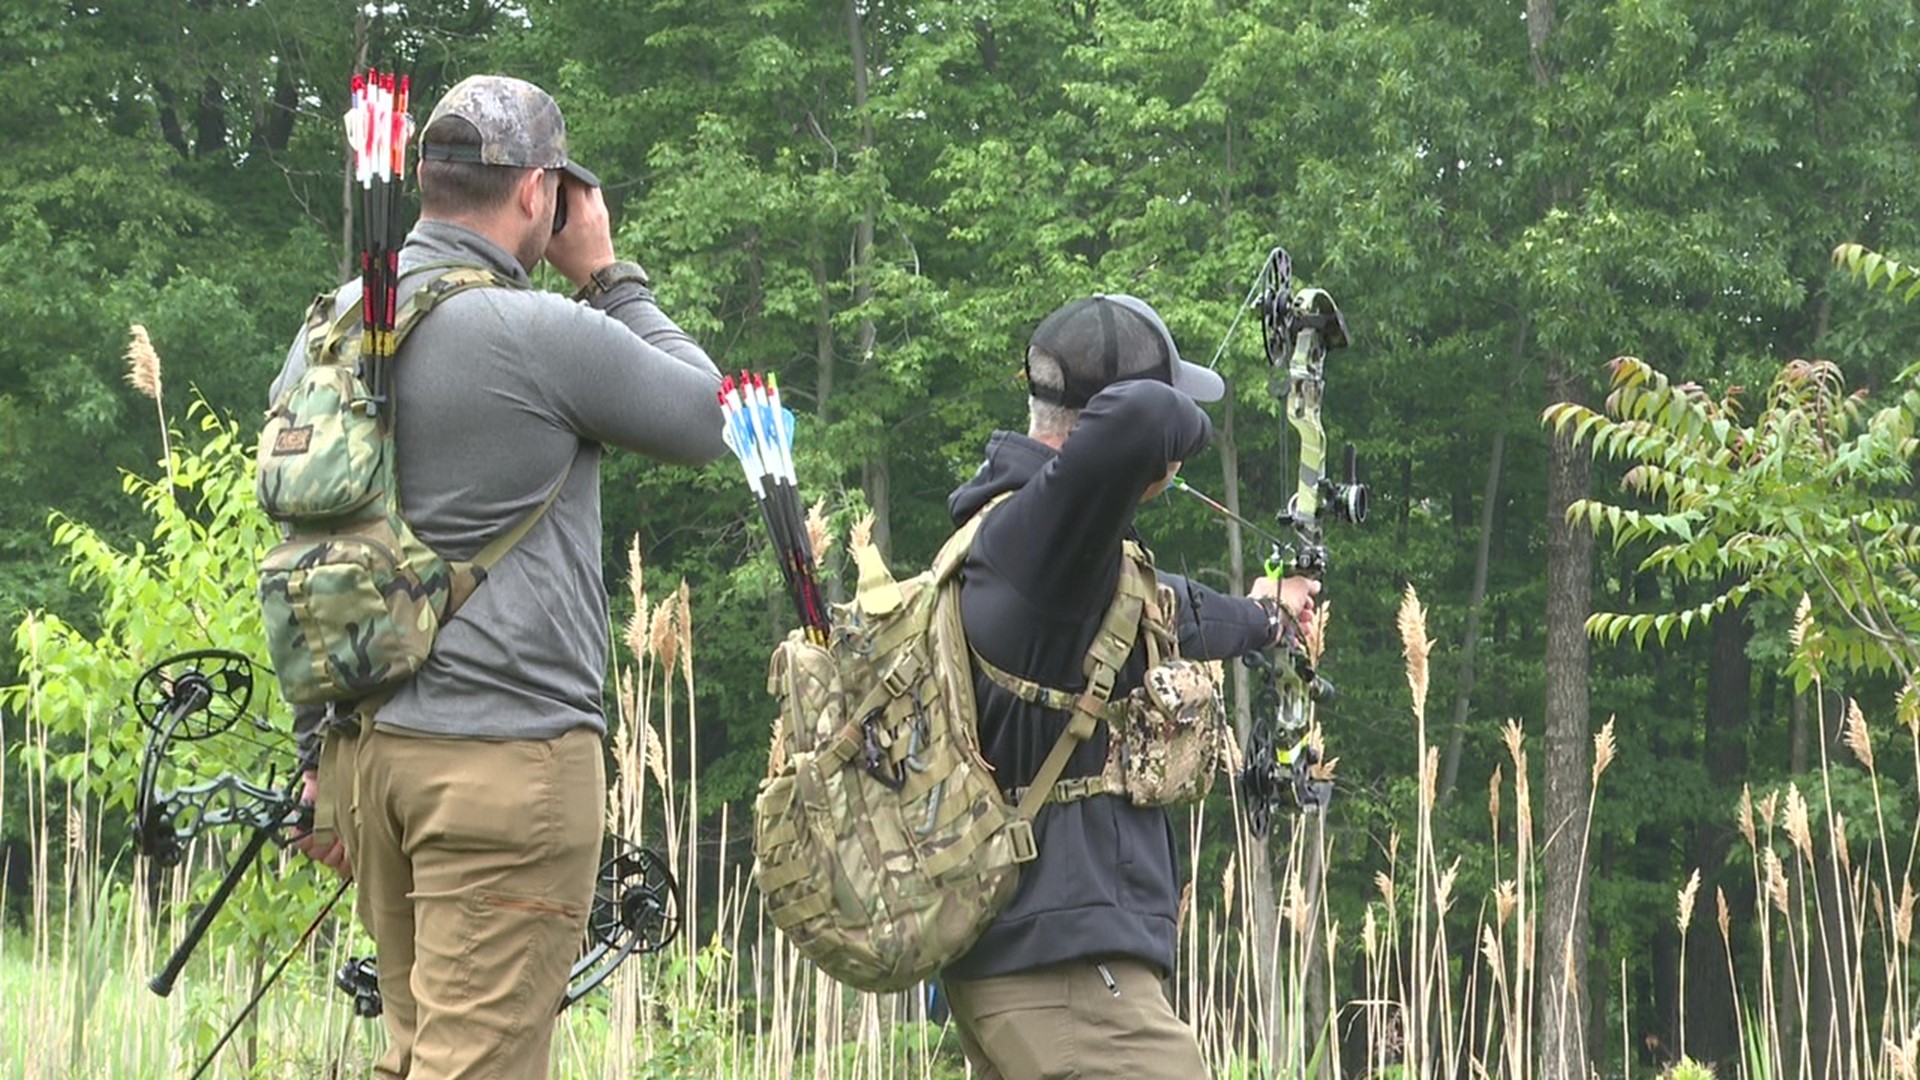 Newswatch 16's Courtney Harrison takes us to Archery Fest and shows us what to expect from the three-day event.